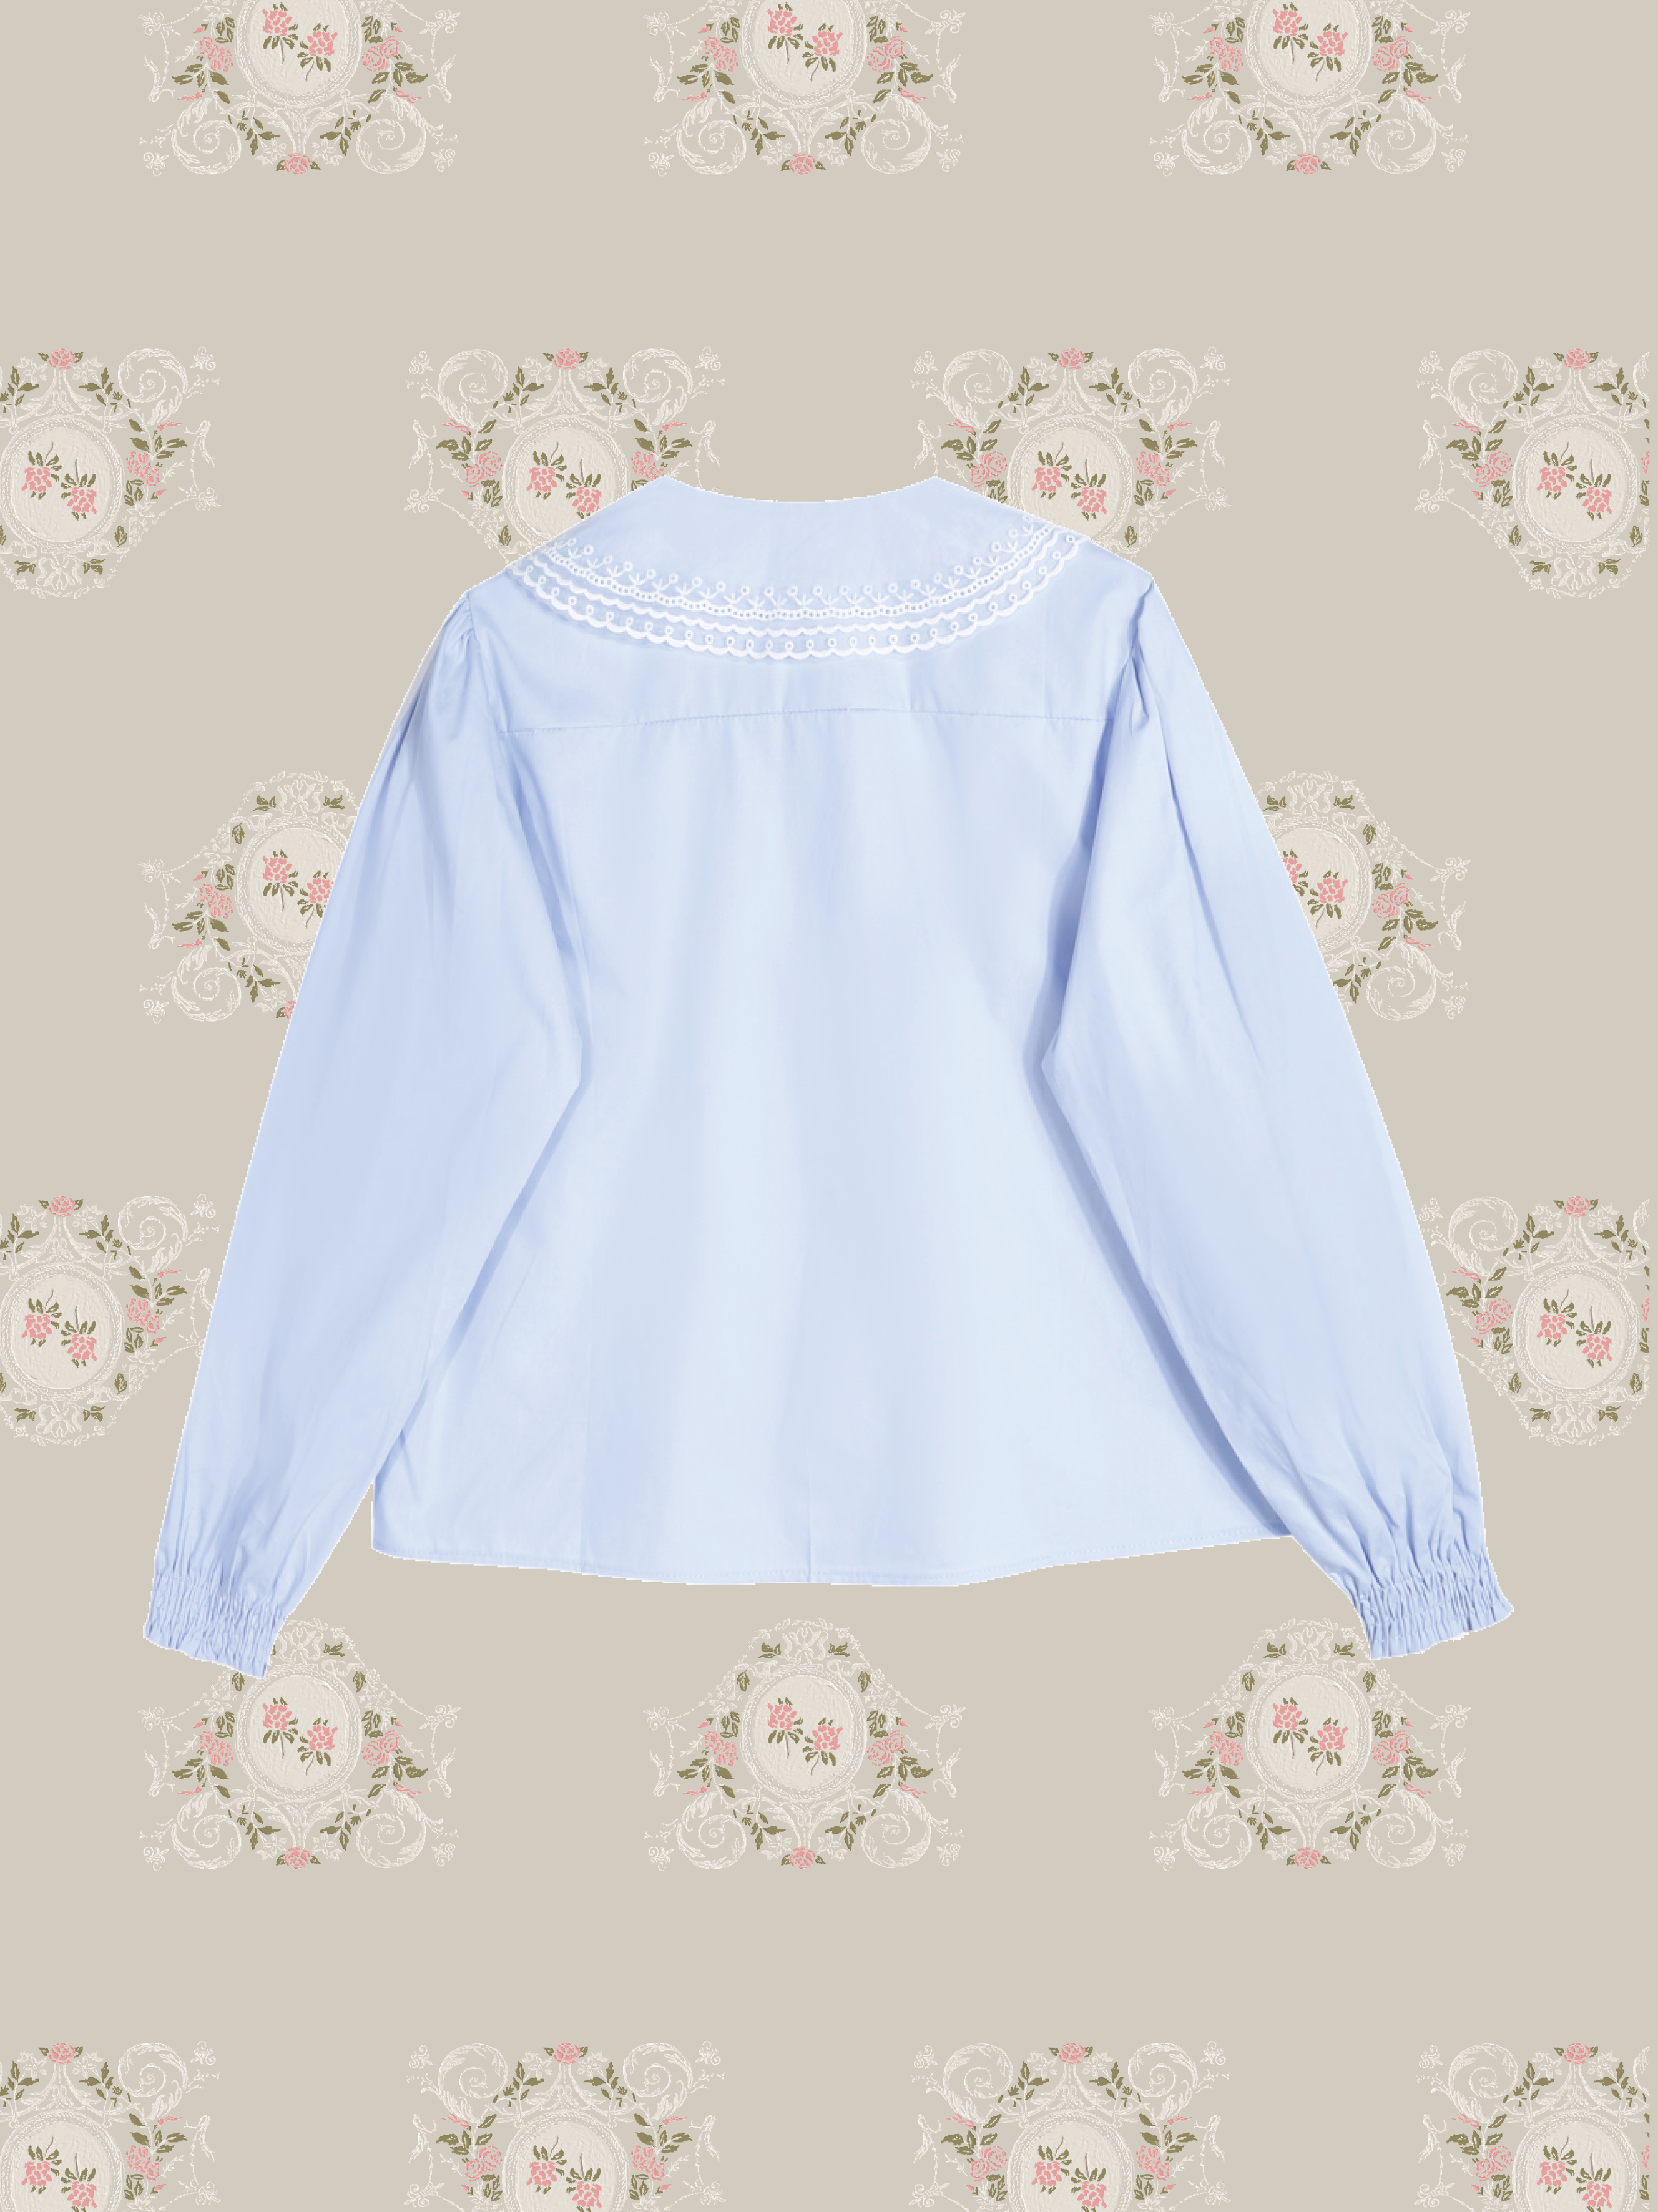 Double Lace Collar Shirt 